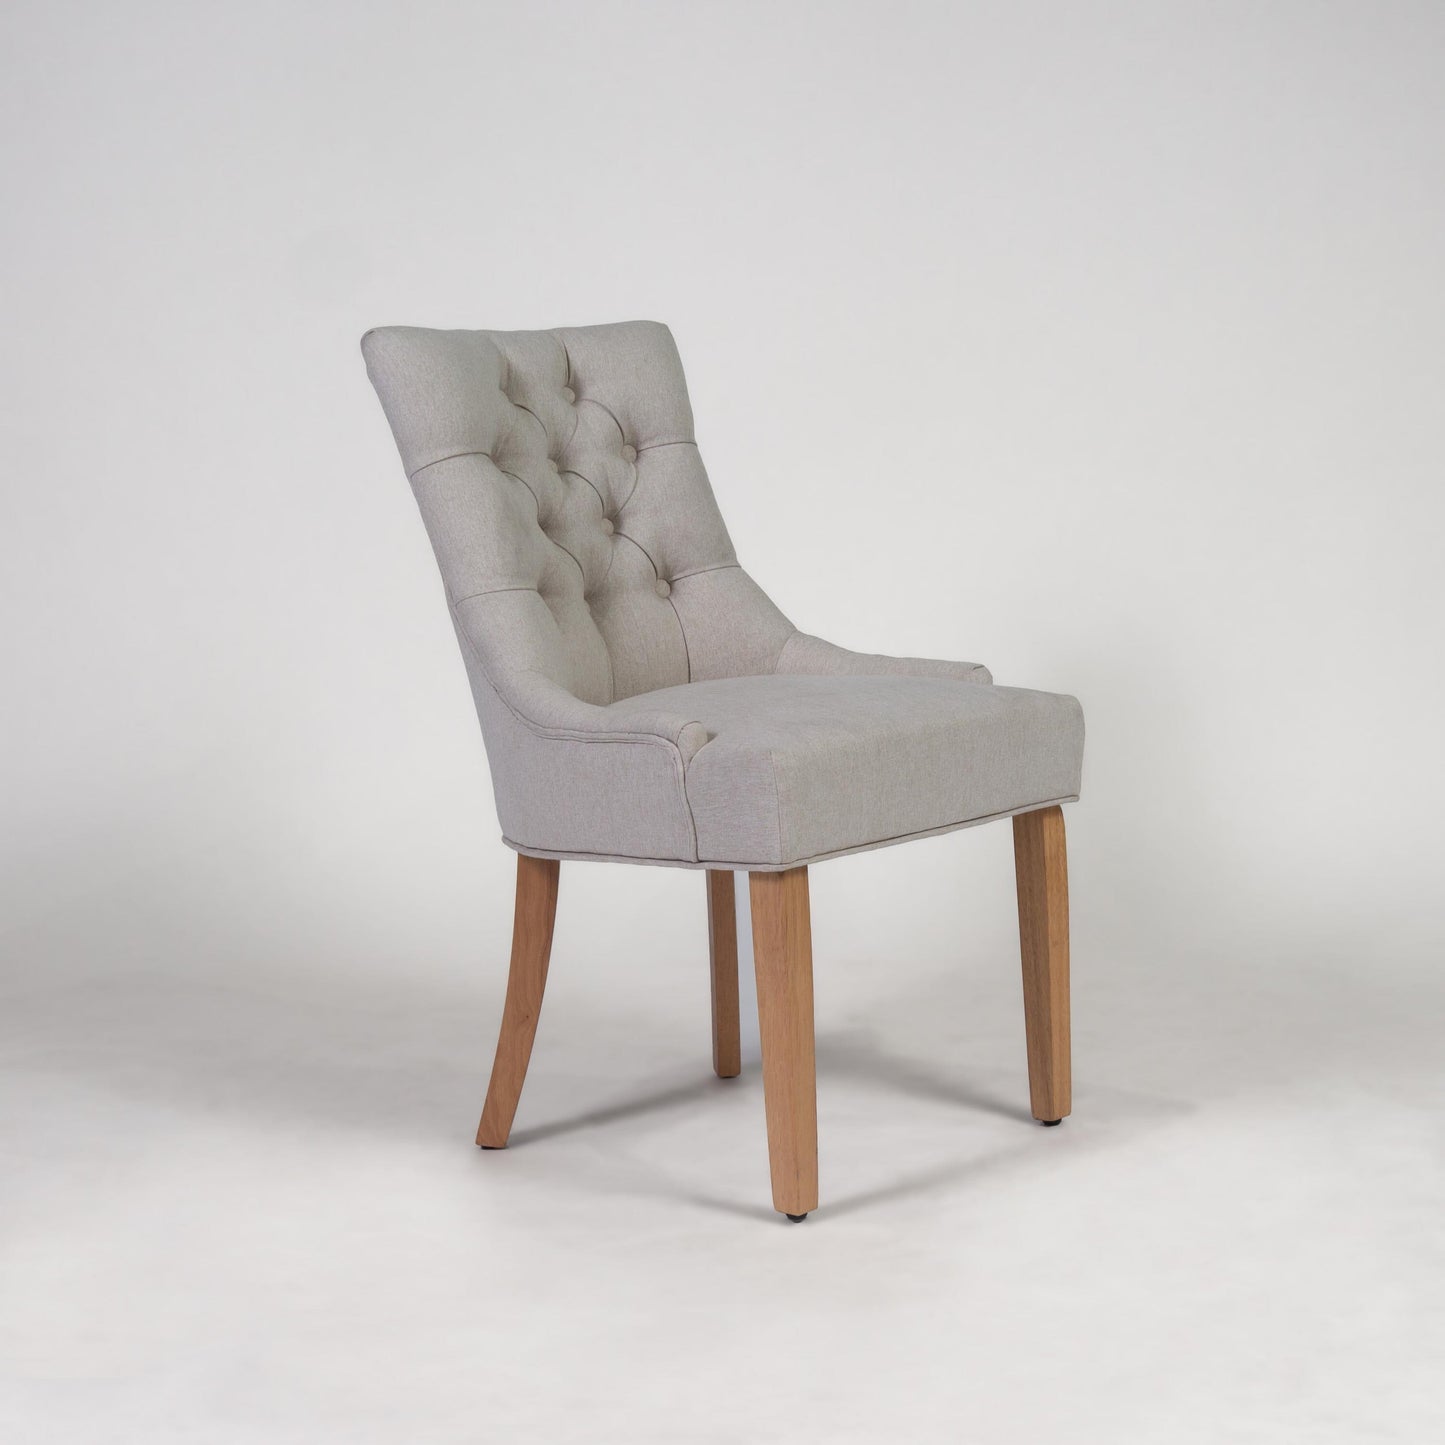 Louis dining chairs - set of 2 - oatmeal and light wood - Laura James